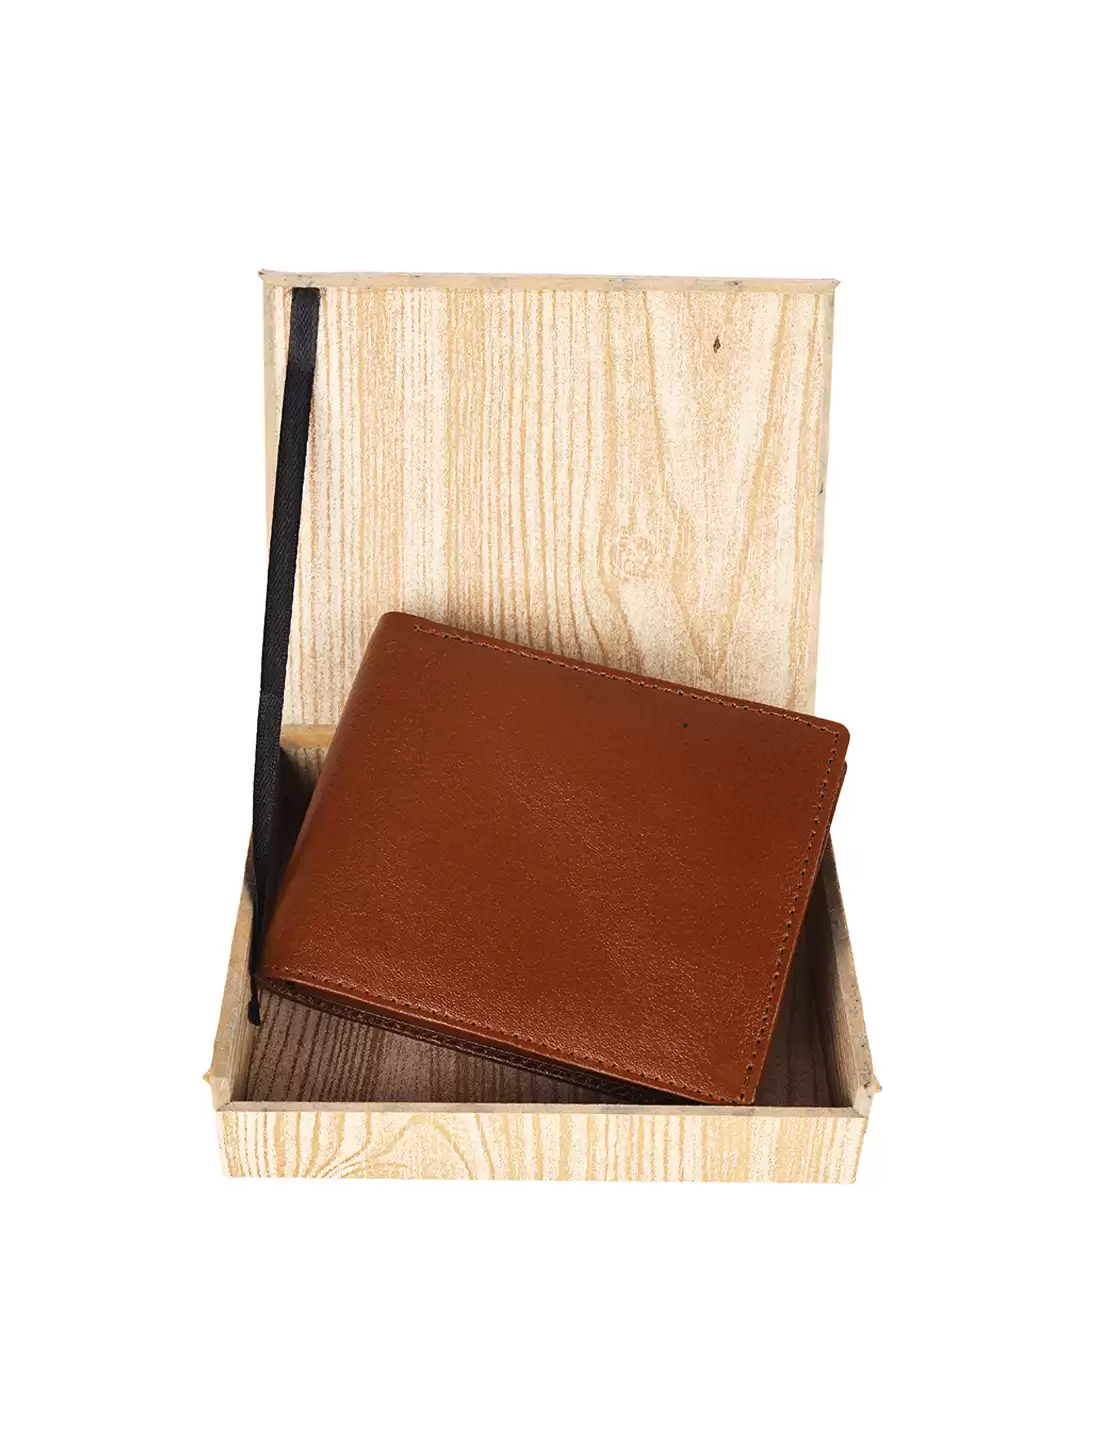 Buy munros® Men's Tan Wallet Stylish Genuine Leather Wallets for Men |  Latest Gents Purse with Card Holder Compartment at Amazon.in